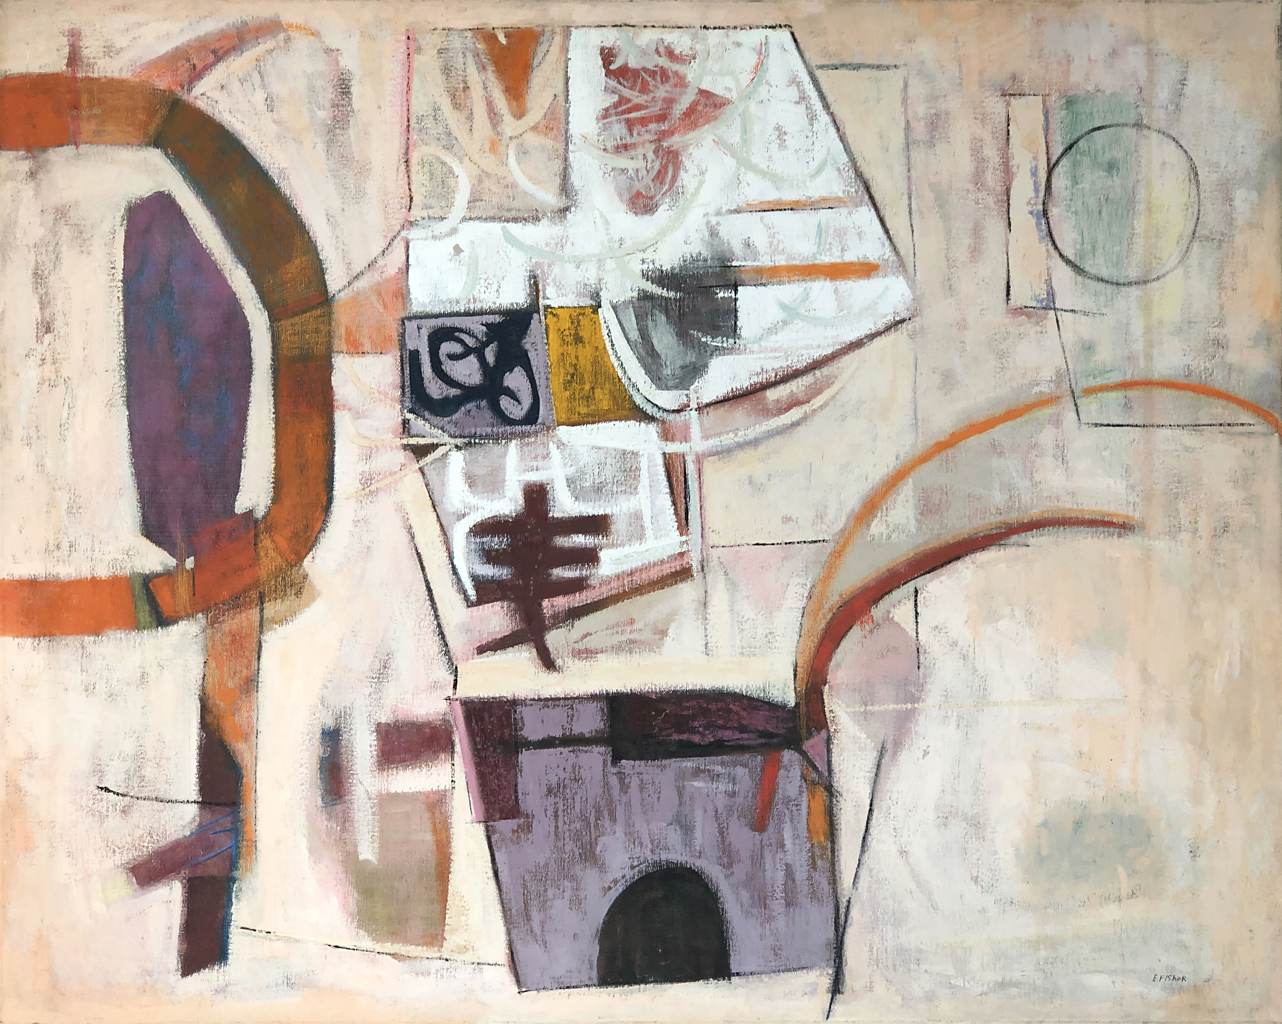 Oriental #2: Abstract Painting by Ethel Fisher, 1957, oil on canvas, 32 x 42 inches, mid-twentieth century abstract painting, widely exhibited in Havana, Cuba.